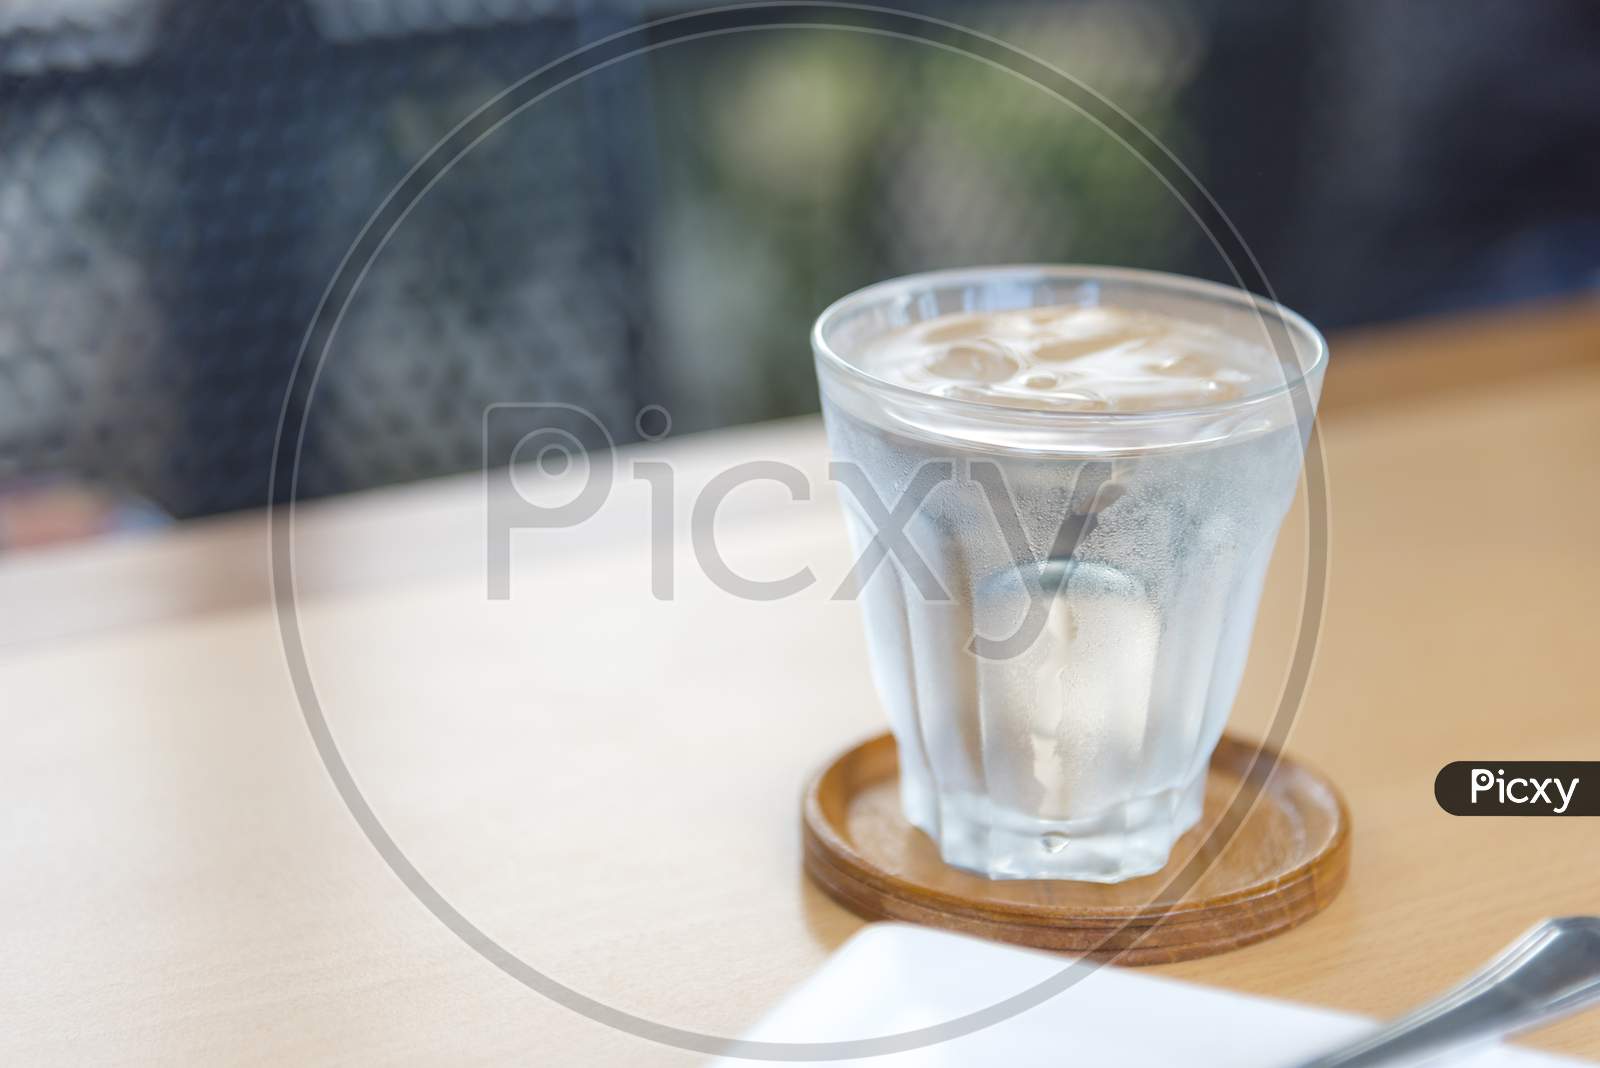 Mineral Water In Glass On Wood Table With Abstract Background, Selective Focus On Stream, Food Drinks And Healthcare Concept